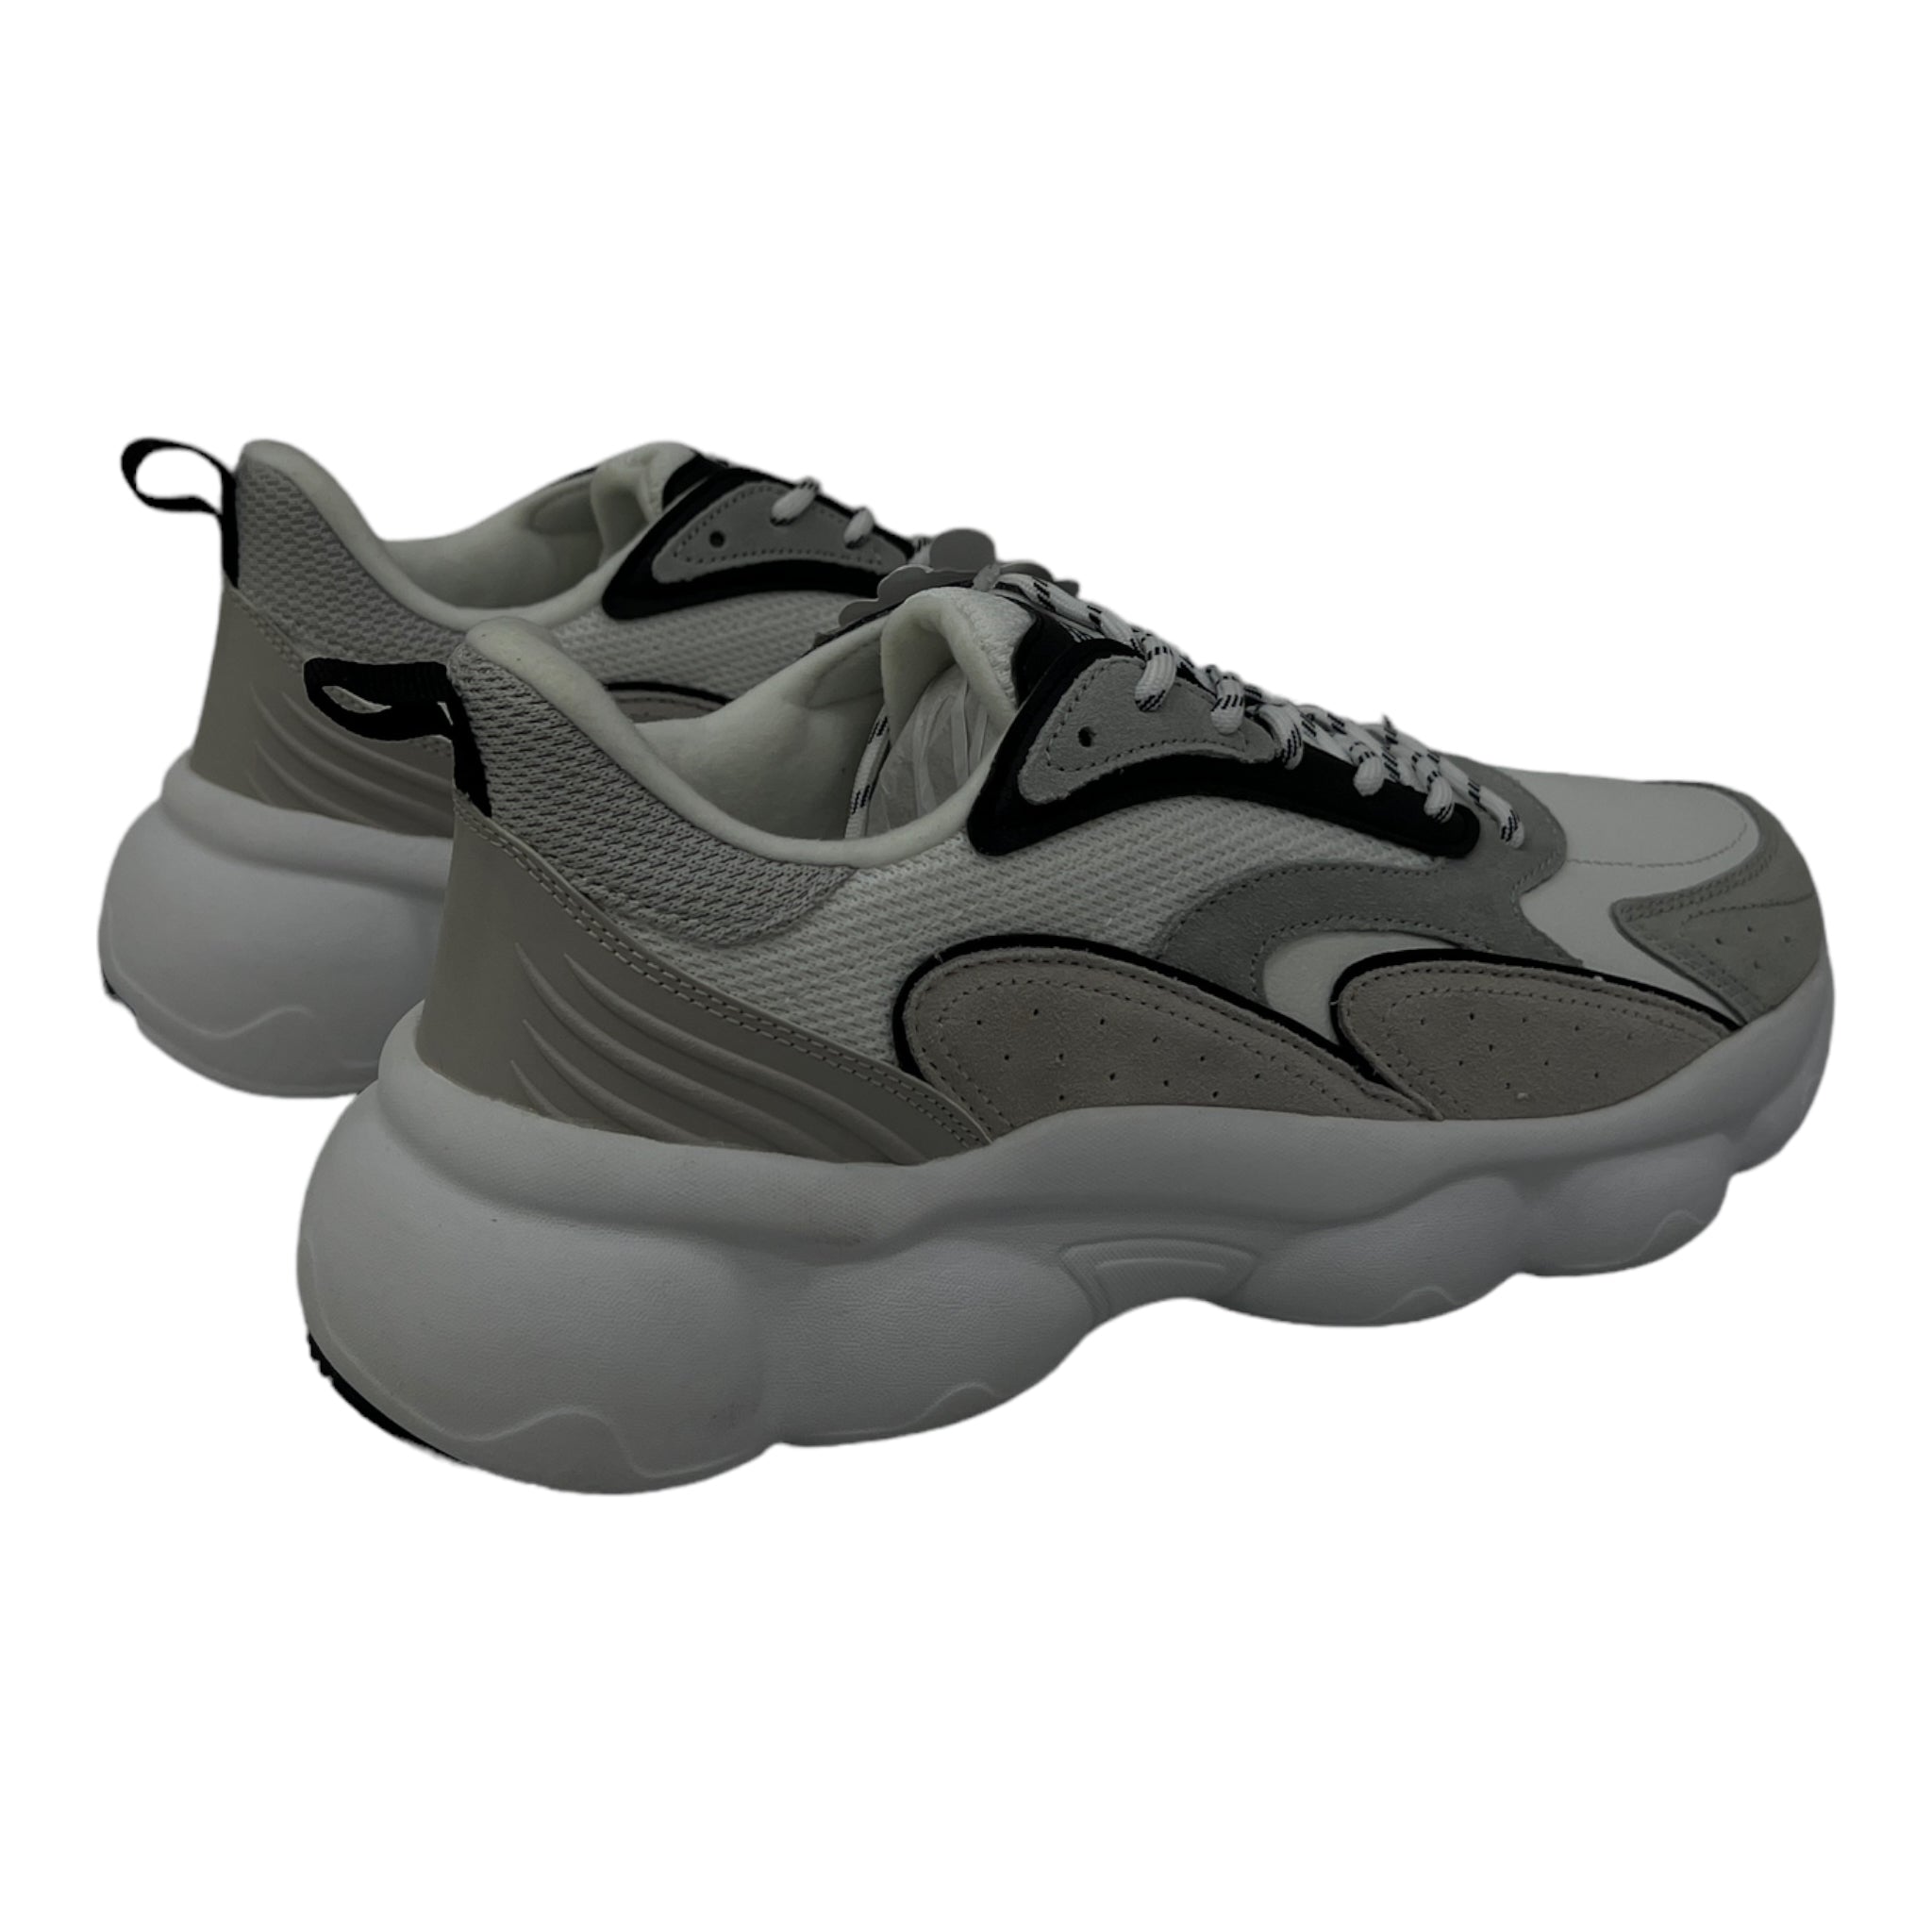 SEMIR MEN'S SNEAKERS WITH SCALLOP SOLE IN GREY